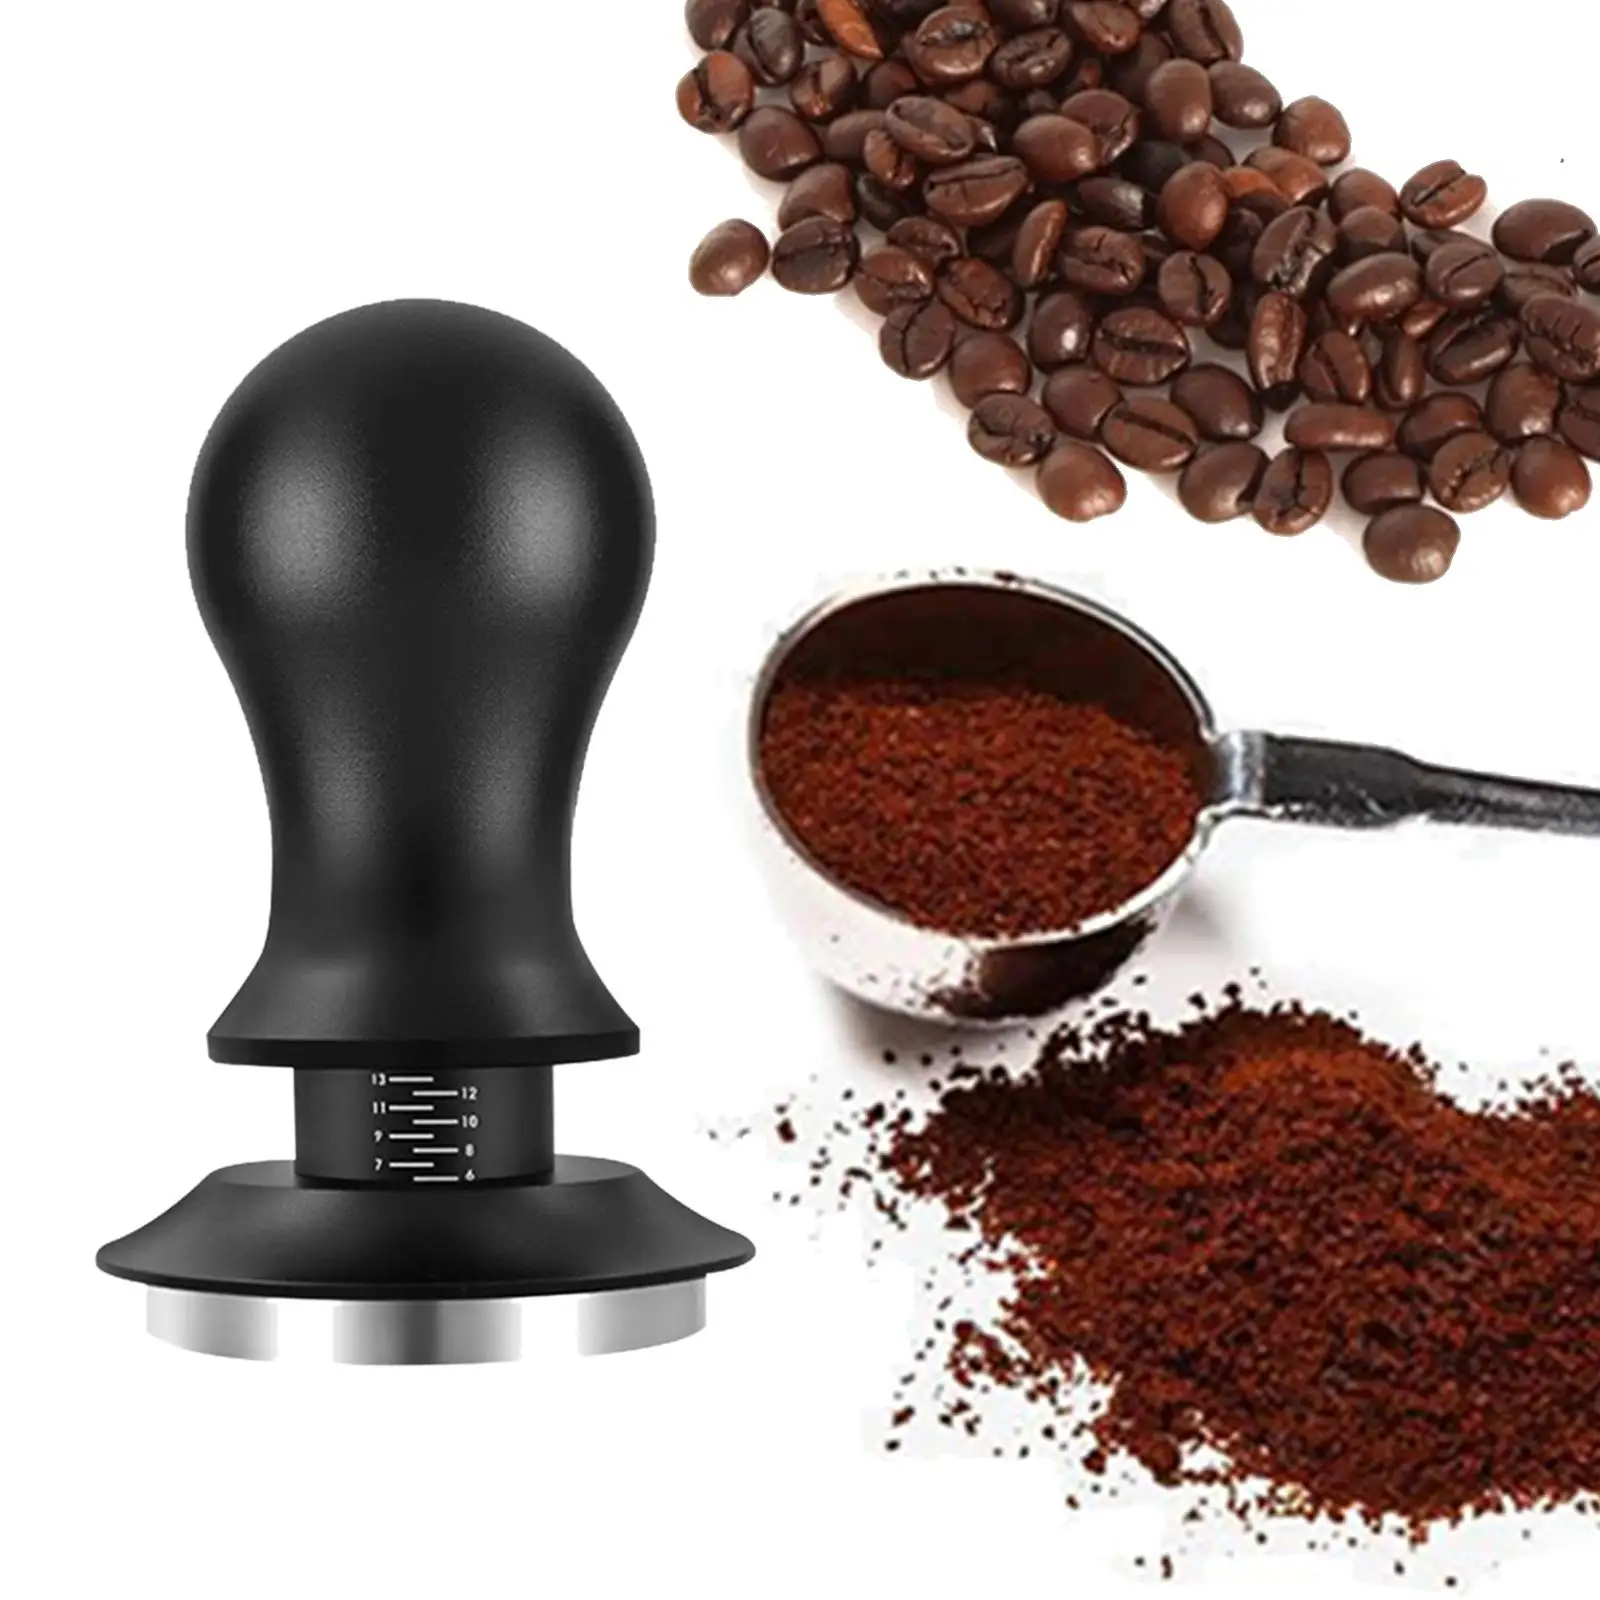 

Professional Coffee Tamper Portafilter Espresso Machine Accessories with Scale Coffee Distribution Tool for Working Shop